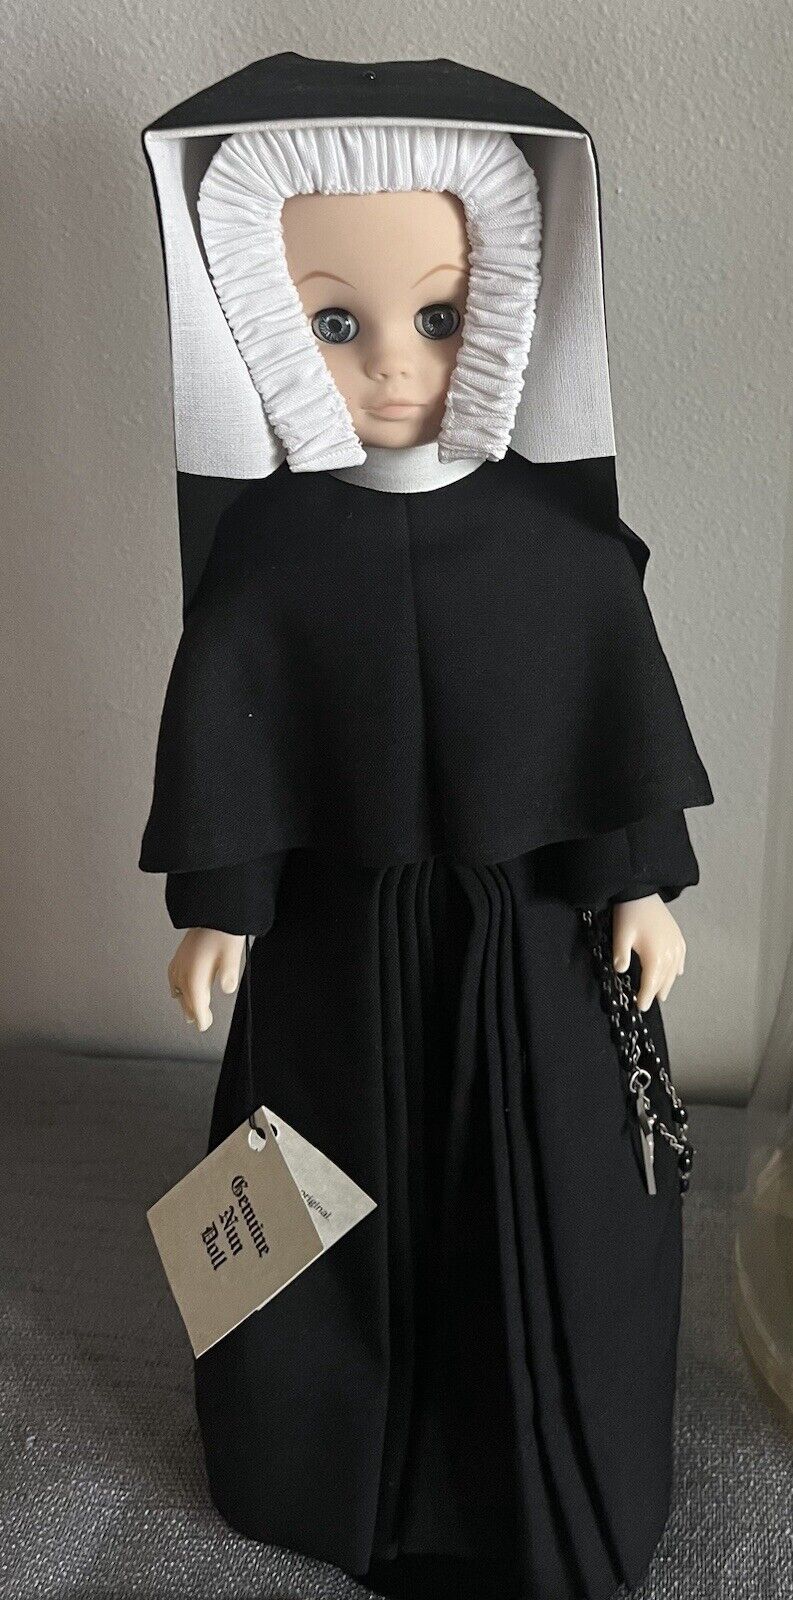 RARE Sister Of Charity Of The Blessed Virgin Mary Genuine 1985 Nun Doll 17.5 In.